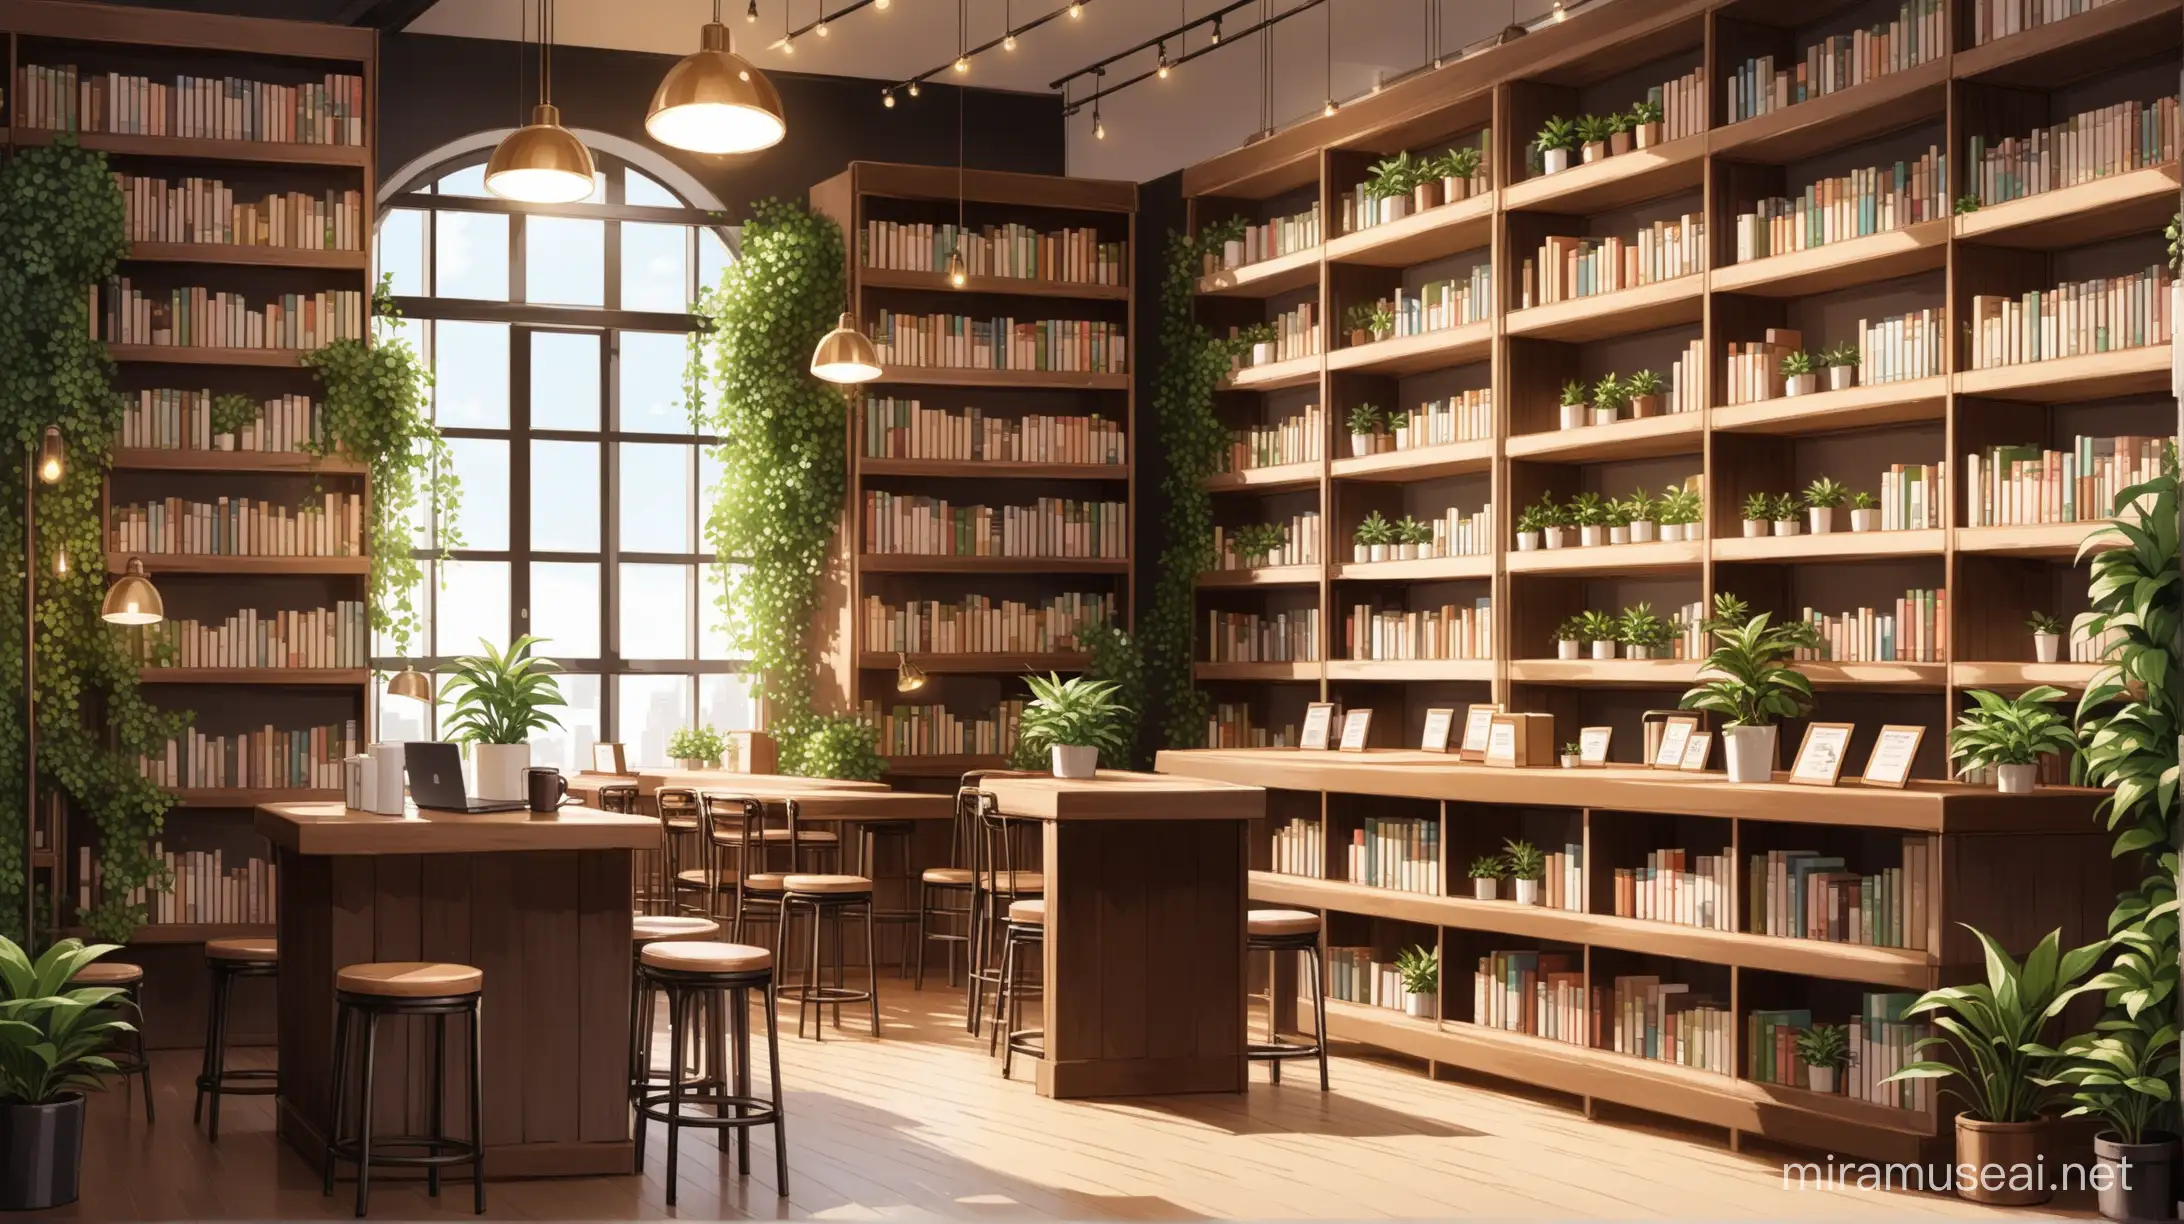 create me a background of a coffee shop library with lots of small plants decorating the place